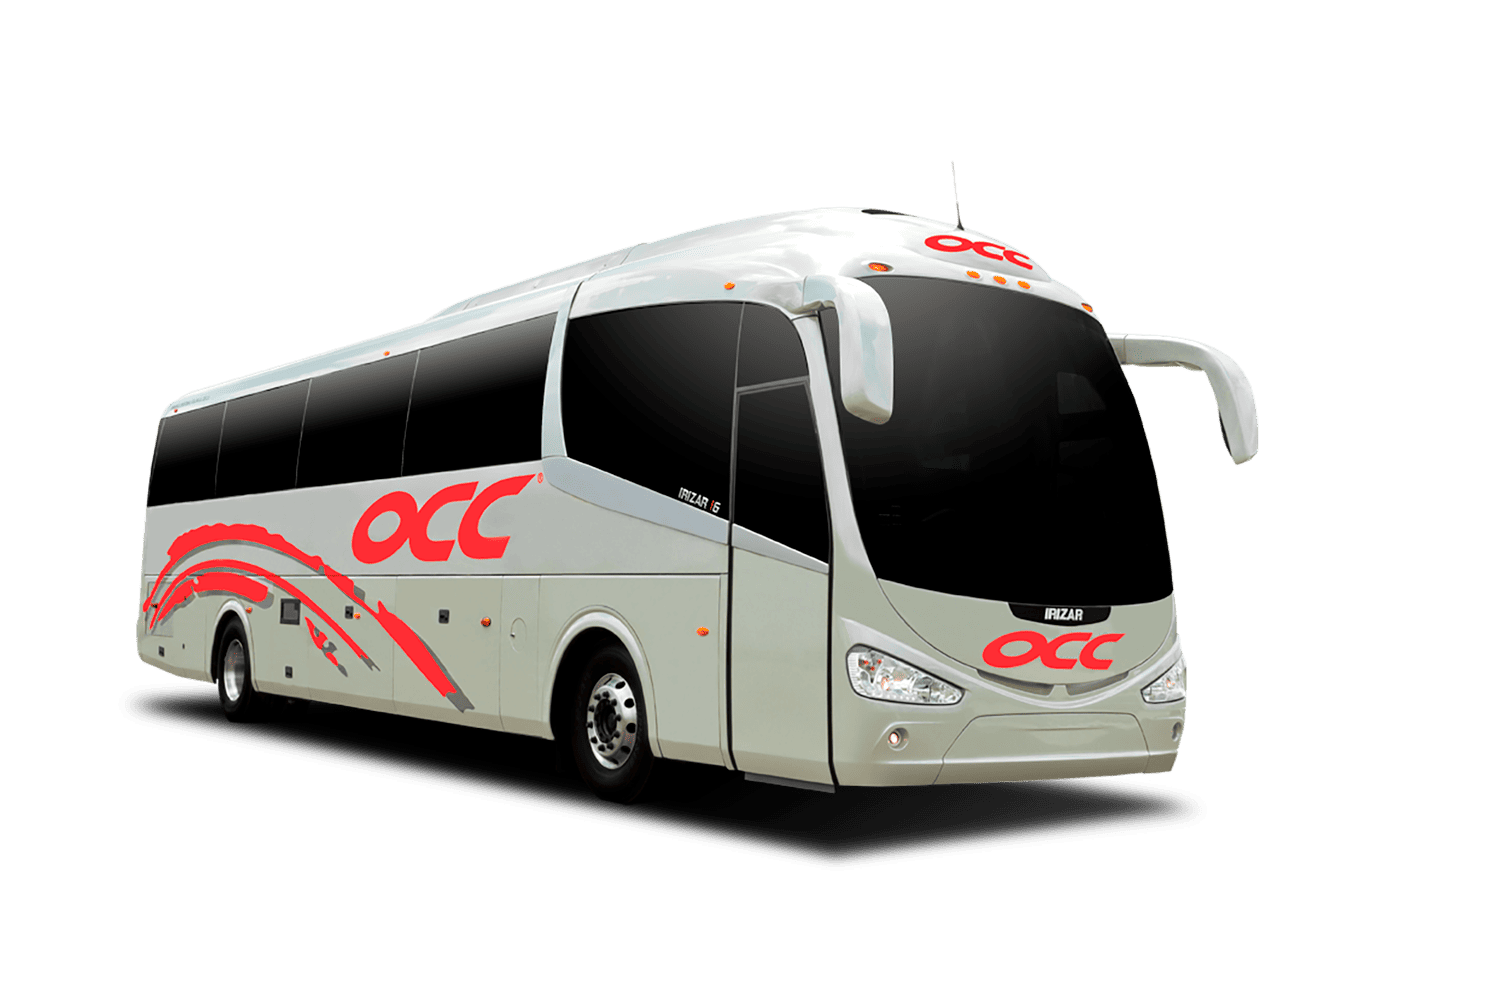 How To Get From Campeche to Playa del Carmen By Bus - All Possible Ways, cheapest way from Campeche to Playa del Carmen, Campeche to Playa del Carmen, OCC bus from Campeche to Playa del Carmen, ado bus from Campeche to Playa del Carmen, shared van from Campeche to Playa del Carmen, Colectivo from Campeche to Playa del Carmen, Uber from Campeche to Playa del Carmen, taxi from Campeche to Playa del Carmen, Campeche to Playa del Carmen by plane